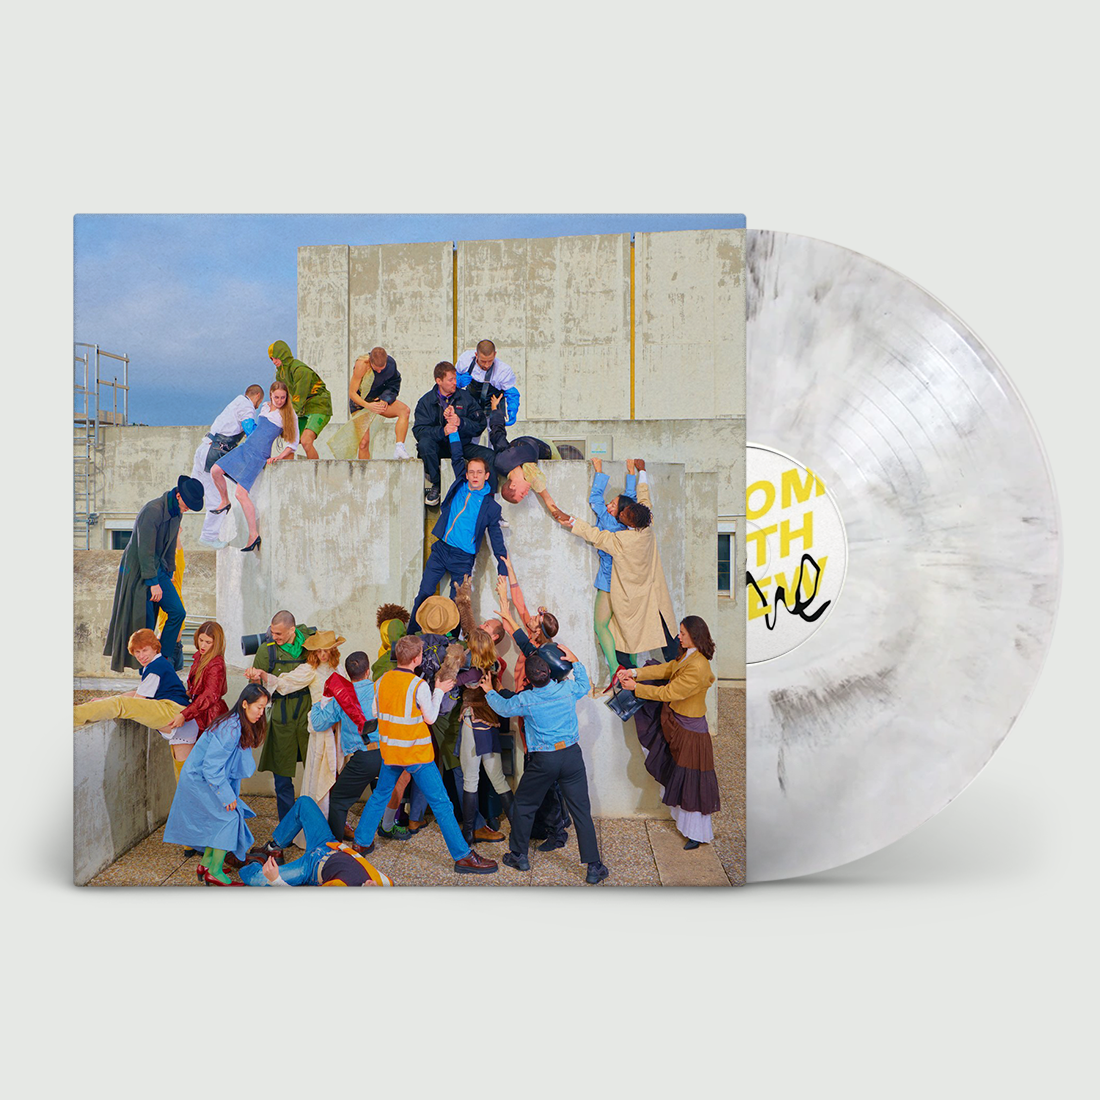 Room With A View: Limited Edition Marbled Vinyl LP